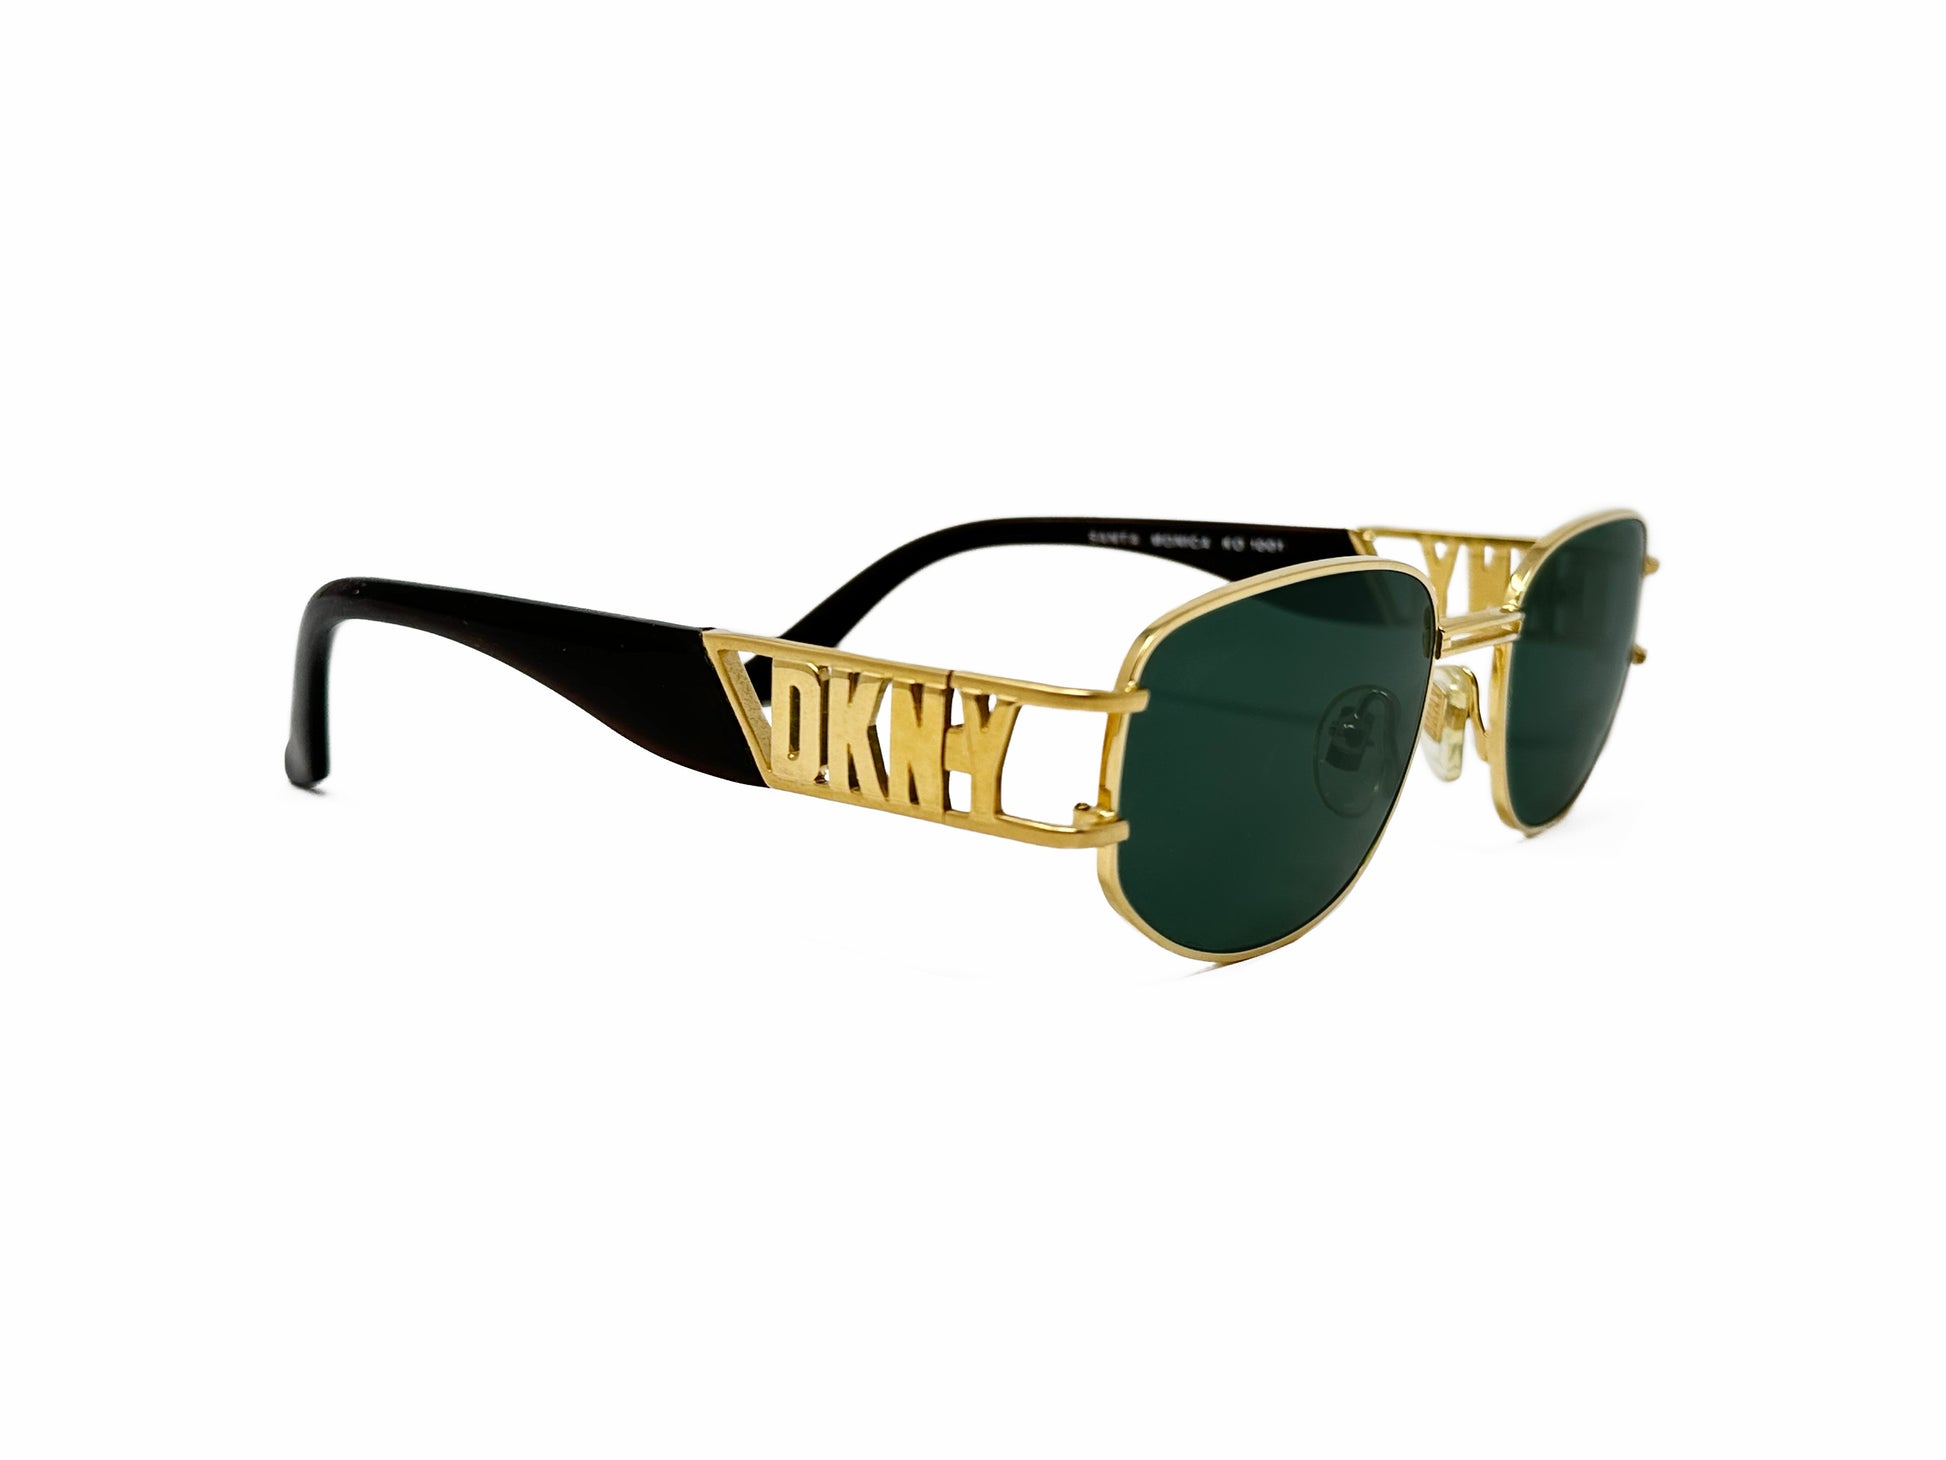 DKNY rounded, slightly angled, square, metal sunglasses with DKNY letters on side of temples. Model: Santa Monica. Color: 1001 - Gold with green lenses and gold/black temples. Side view.